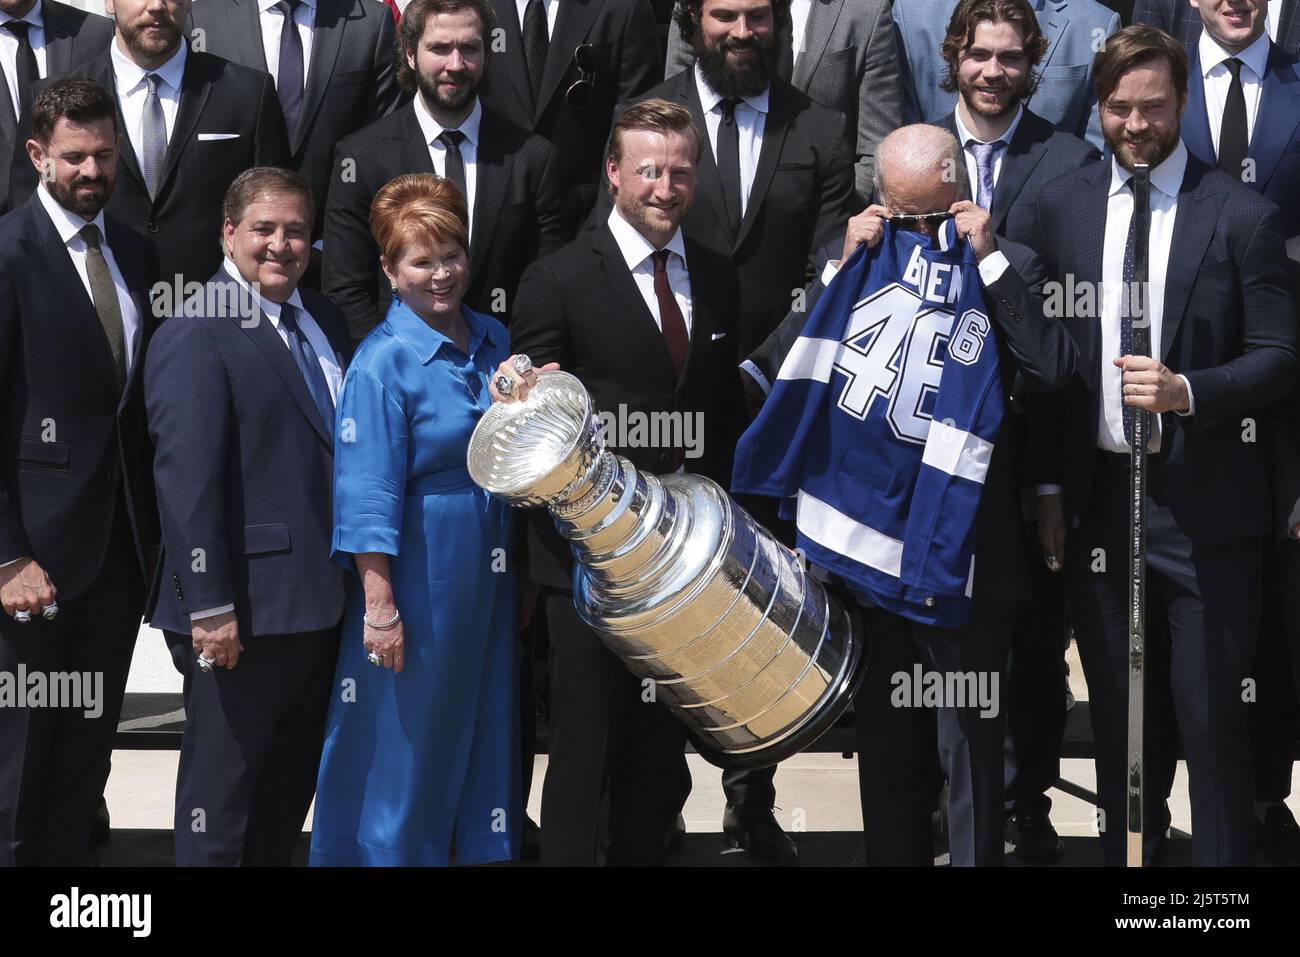 https://c8.alamy.com/comp/2J5T5TM/washington-united-states-25th-apr-2022-us-president-joe-biden-holds-a-hockey-jersey-with-his-name-on-it-as-he-poses-next-to-the-stanley-cup-trophy-during-an-event-to-honor-the-2020-and-2021-stanley-cup-champions-tampa-bay-lightning-on-the-south-lawn-at-the-white-house-on-april-25-2022-in-washington-dc-photo-by-oliver-contrerasupi-credit-upialamy-live-news-2J5T5TM.jpg